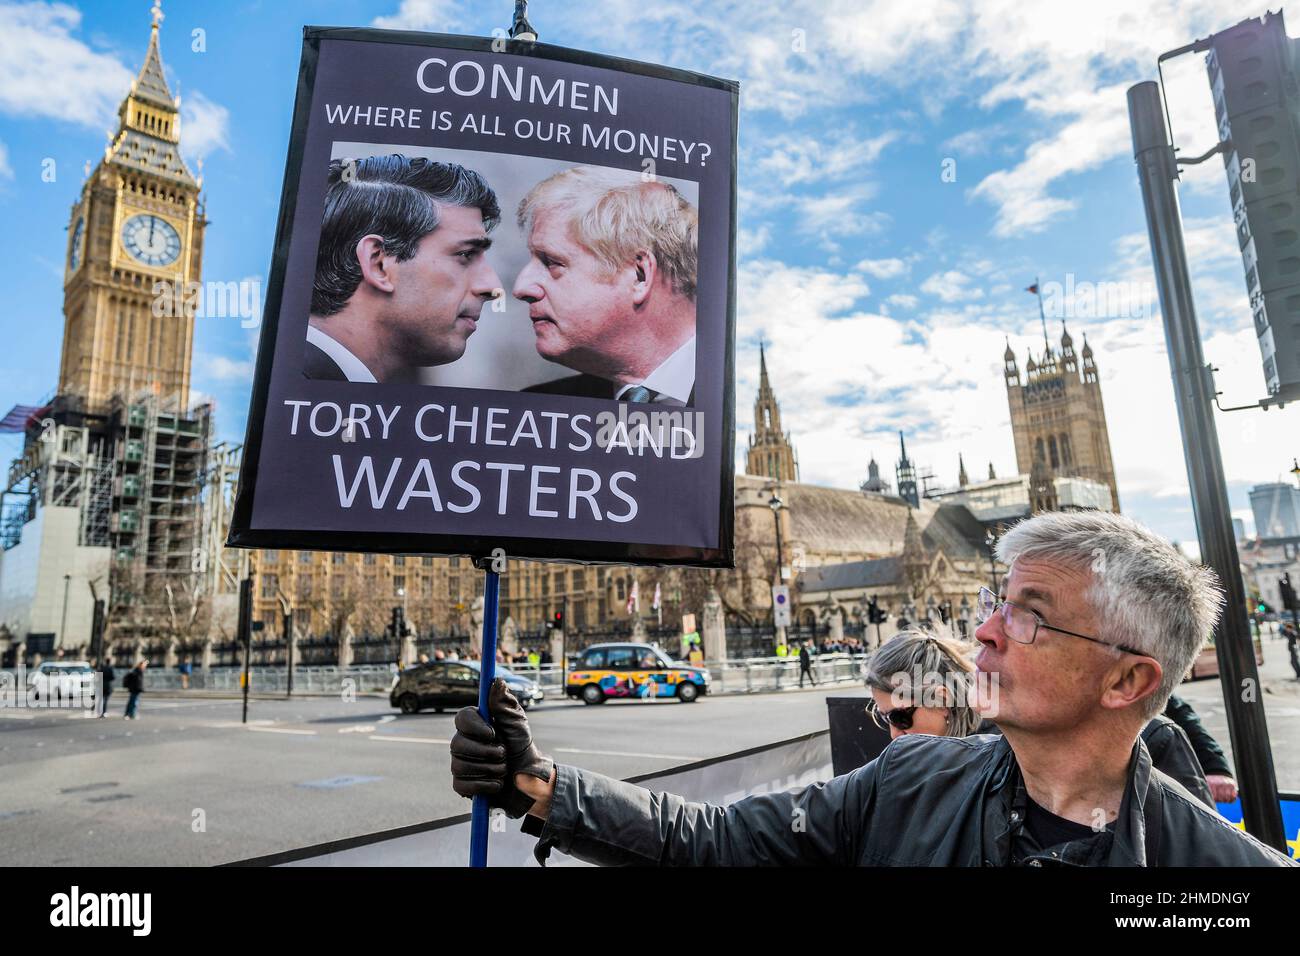 London, UK. 9th Feb, 2022. 'Conmen' - SODEM (Pro EU) protest, led by Steve Bray, now accuse the Prime minister and his party of being 'corrupt' and 'liars' - Protesters in Westminster on the day of PMQ's. Boris Johnsons returns to Prime Minister's Questions (PMQ's) as his troubled times continue. Credit: Guy Bell/Alamy Live News Stock Photo